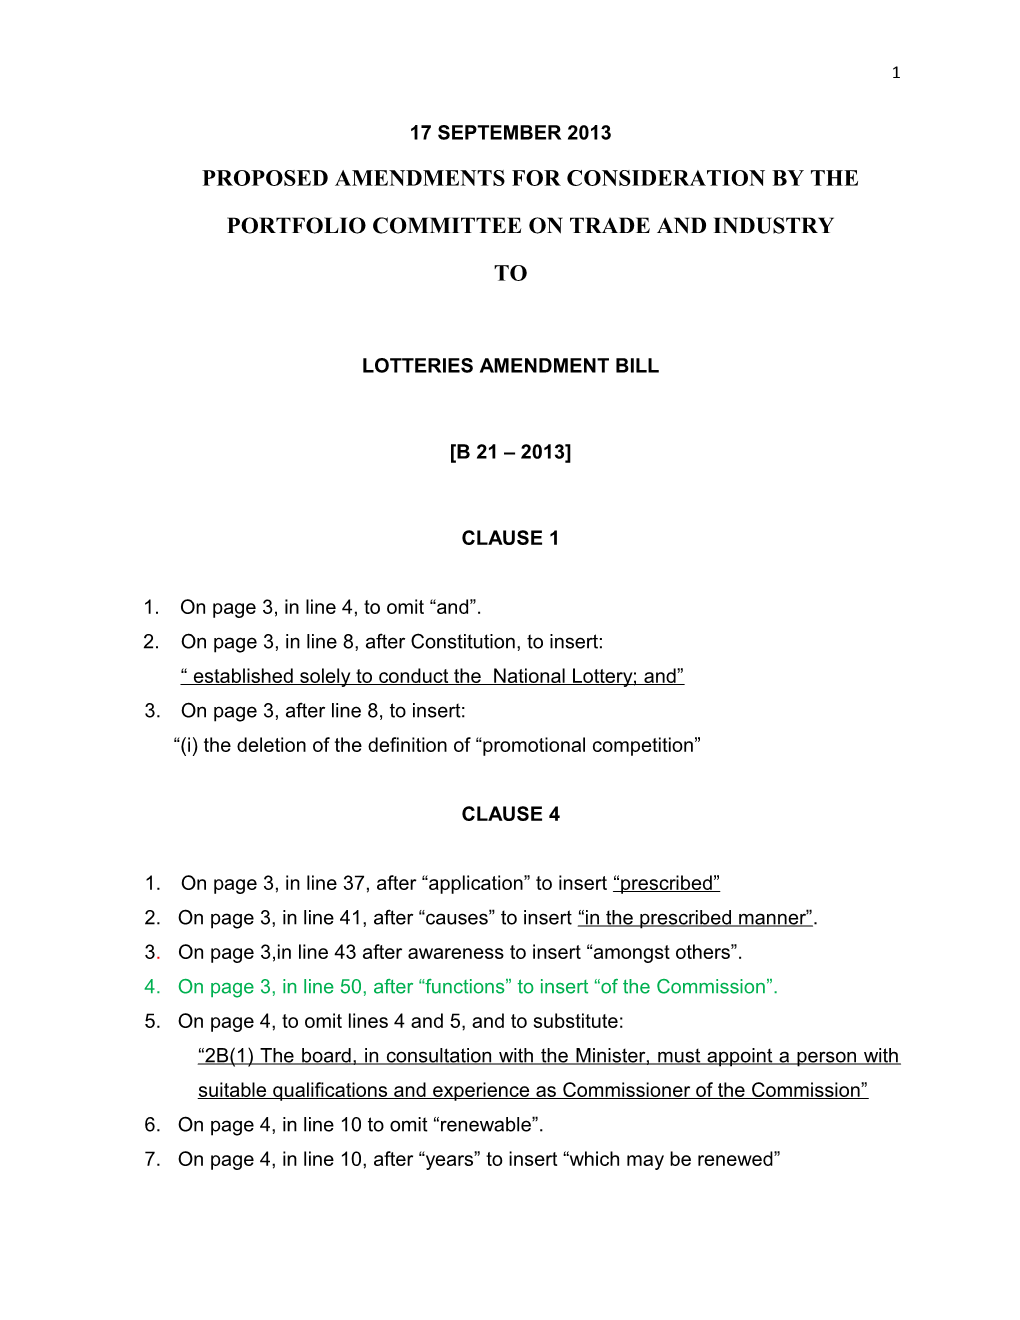 Proposed Amendments for Consideration Bythe